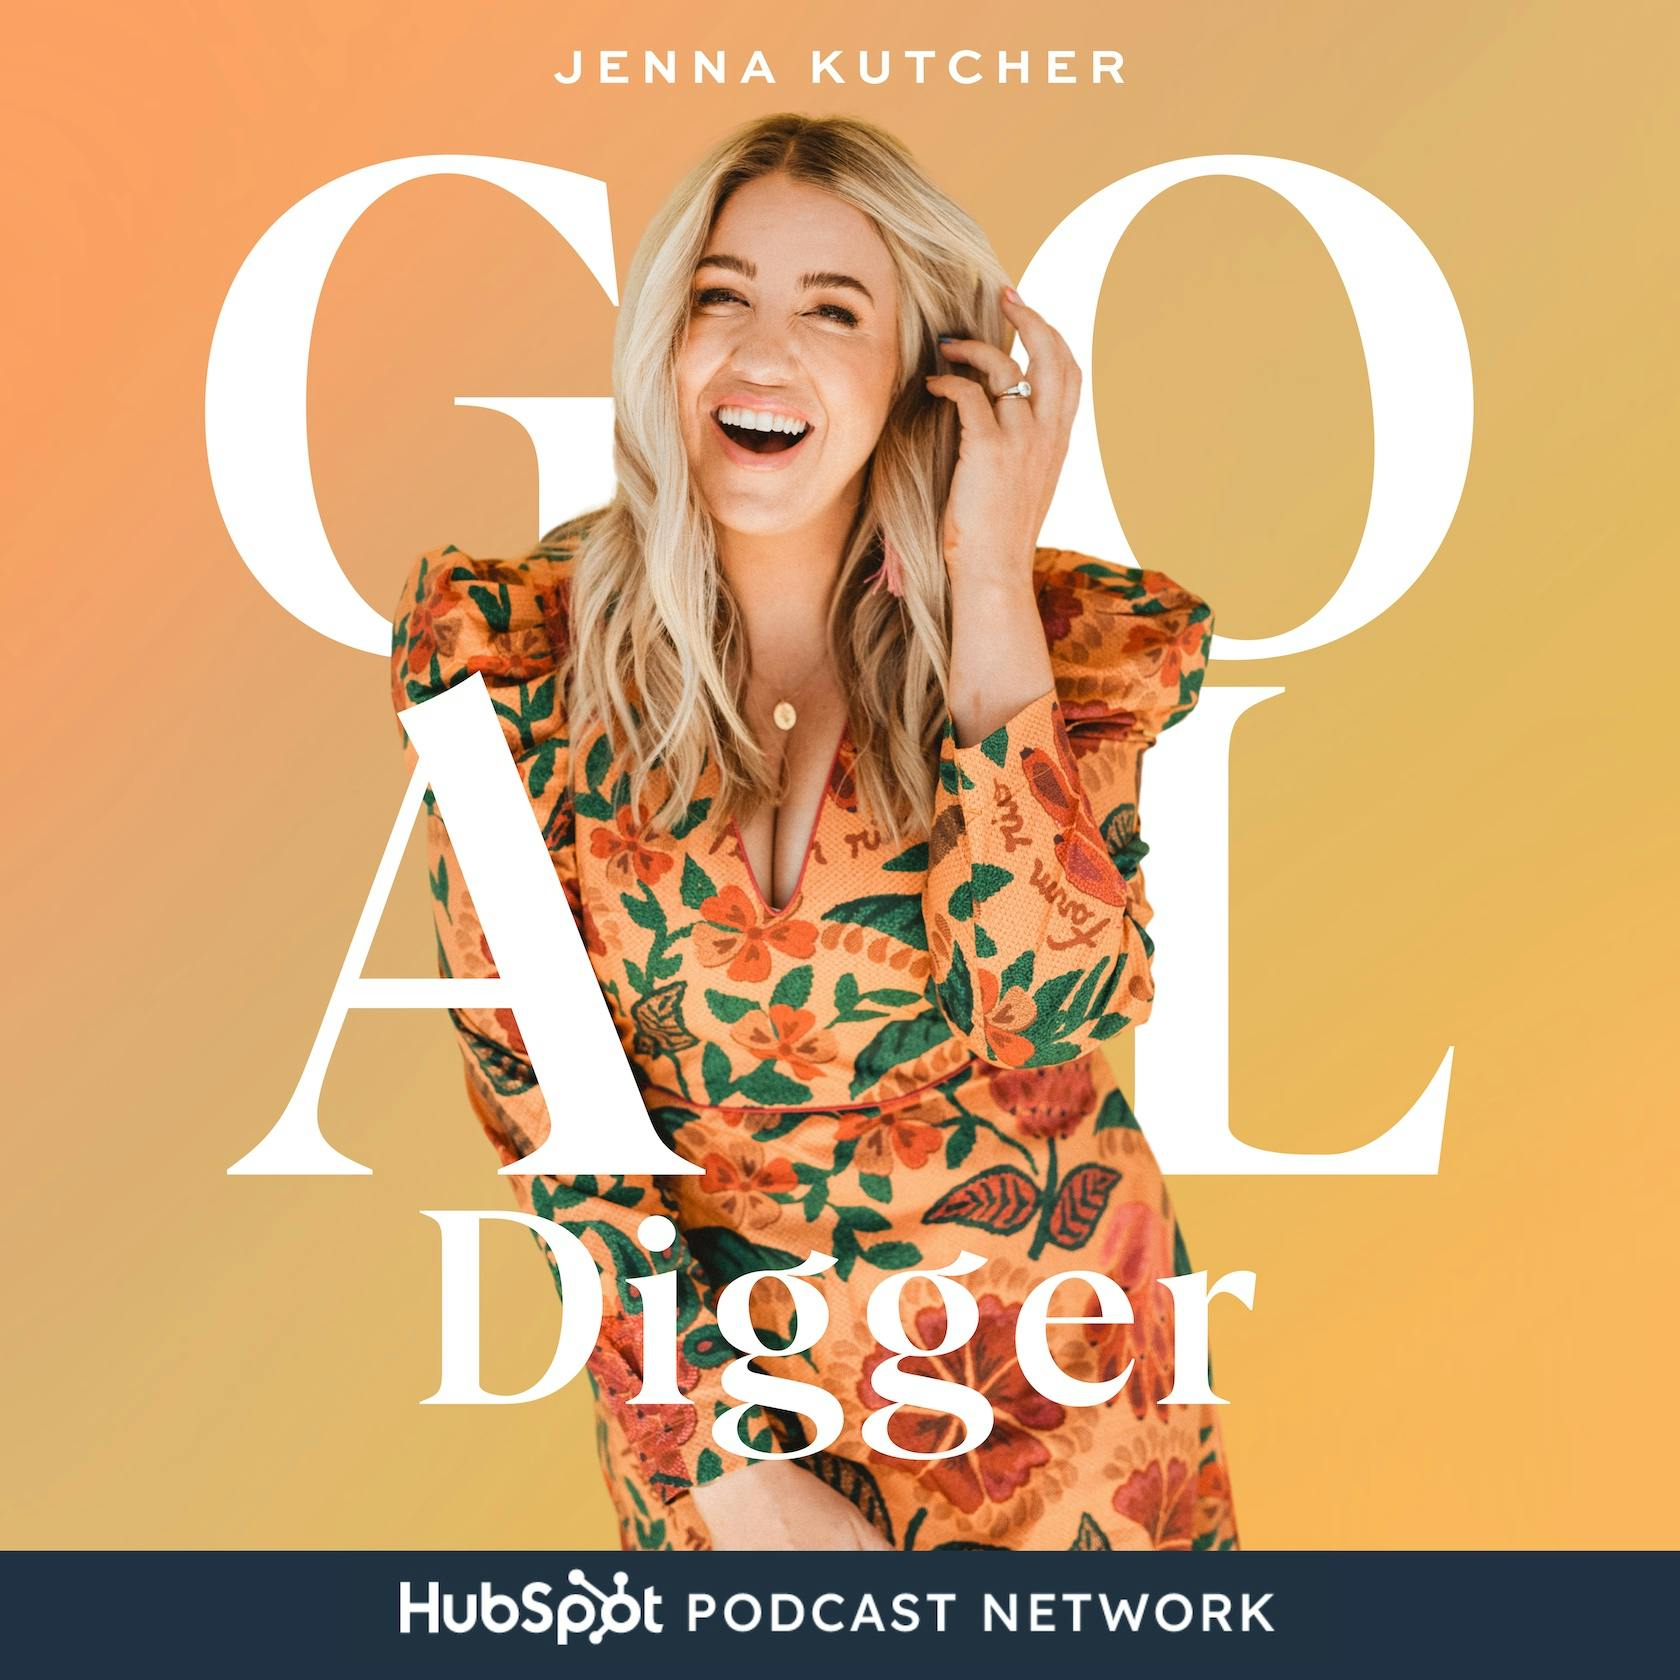 636: The 5 Major Areas You’ll Improve if You Tune into Goal Digger This Year